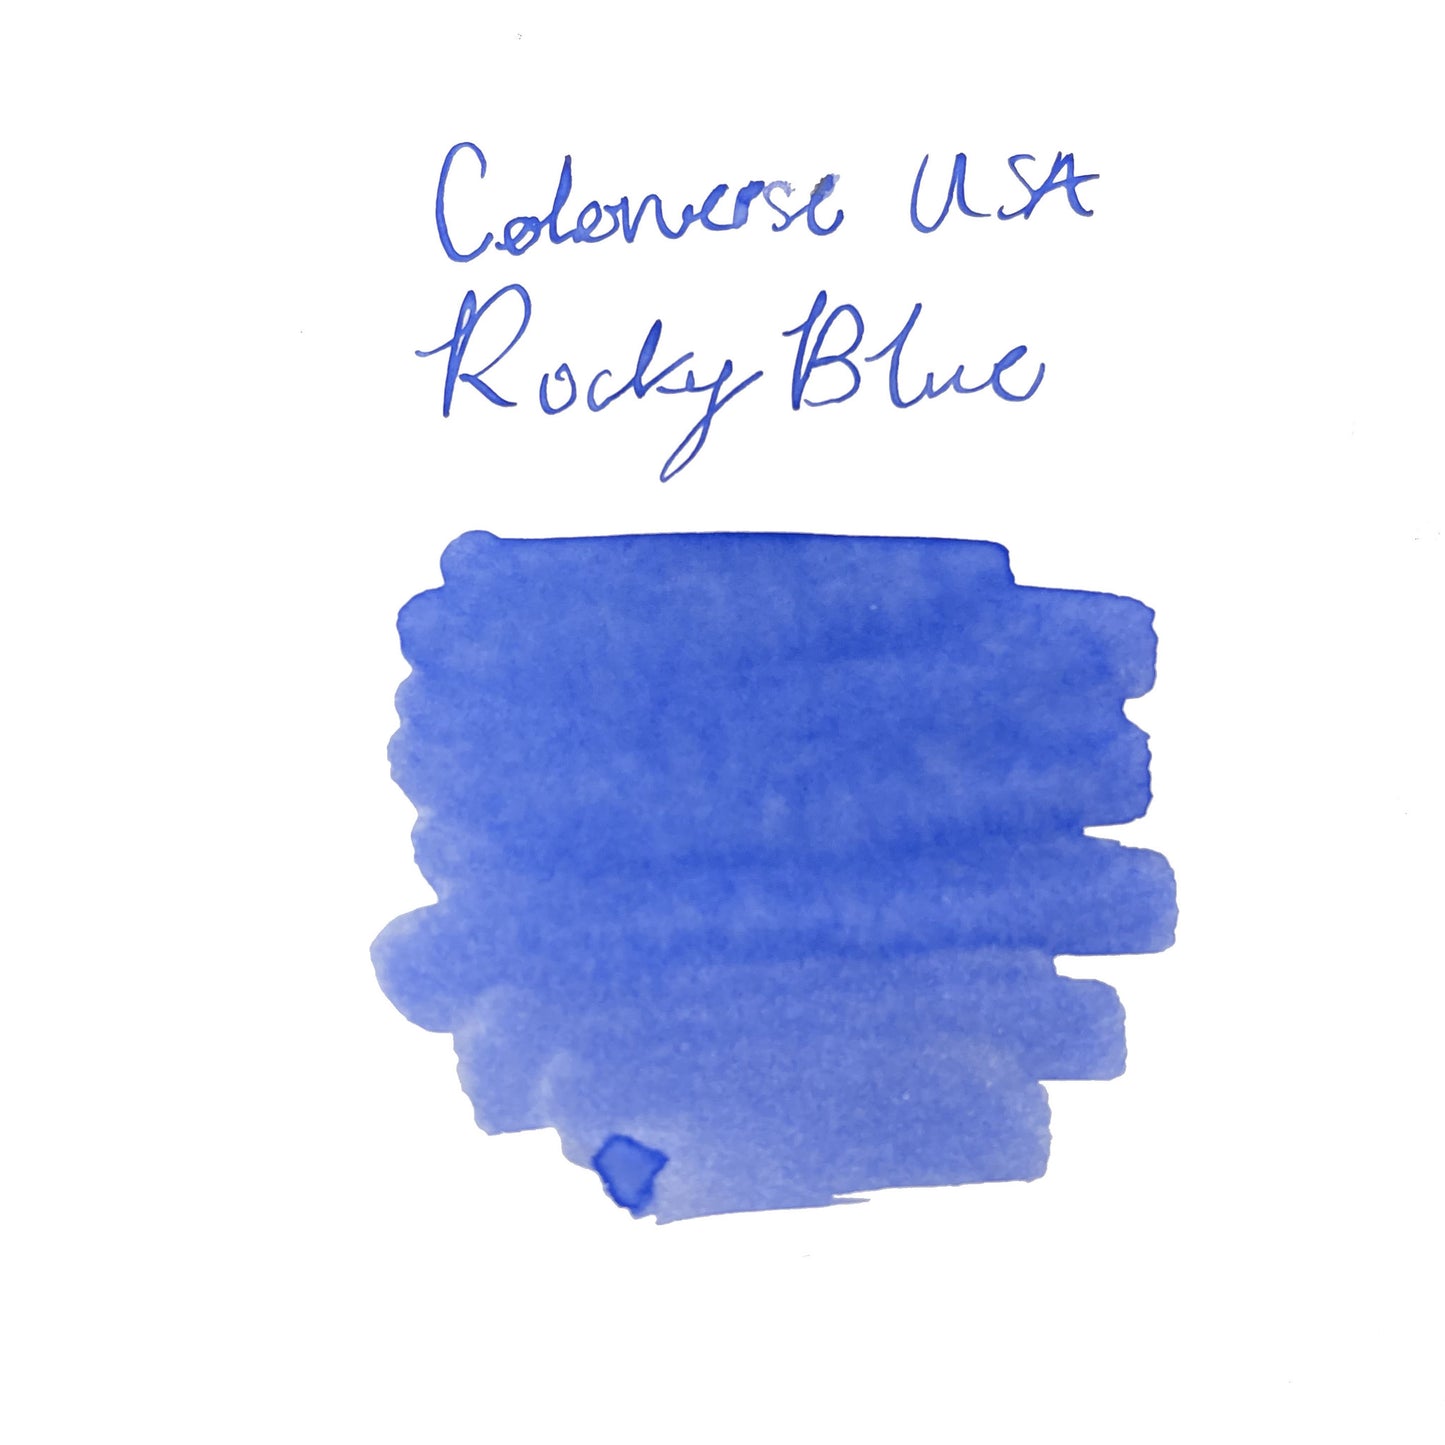 Colorverse Rocky Blue (15ml) Bottled Ink (USA Special Series, Colorado)